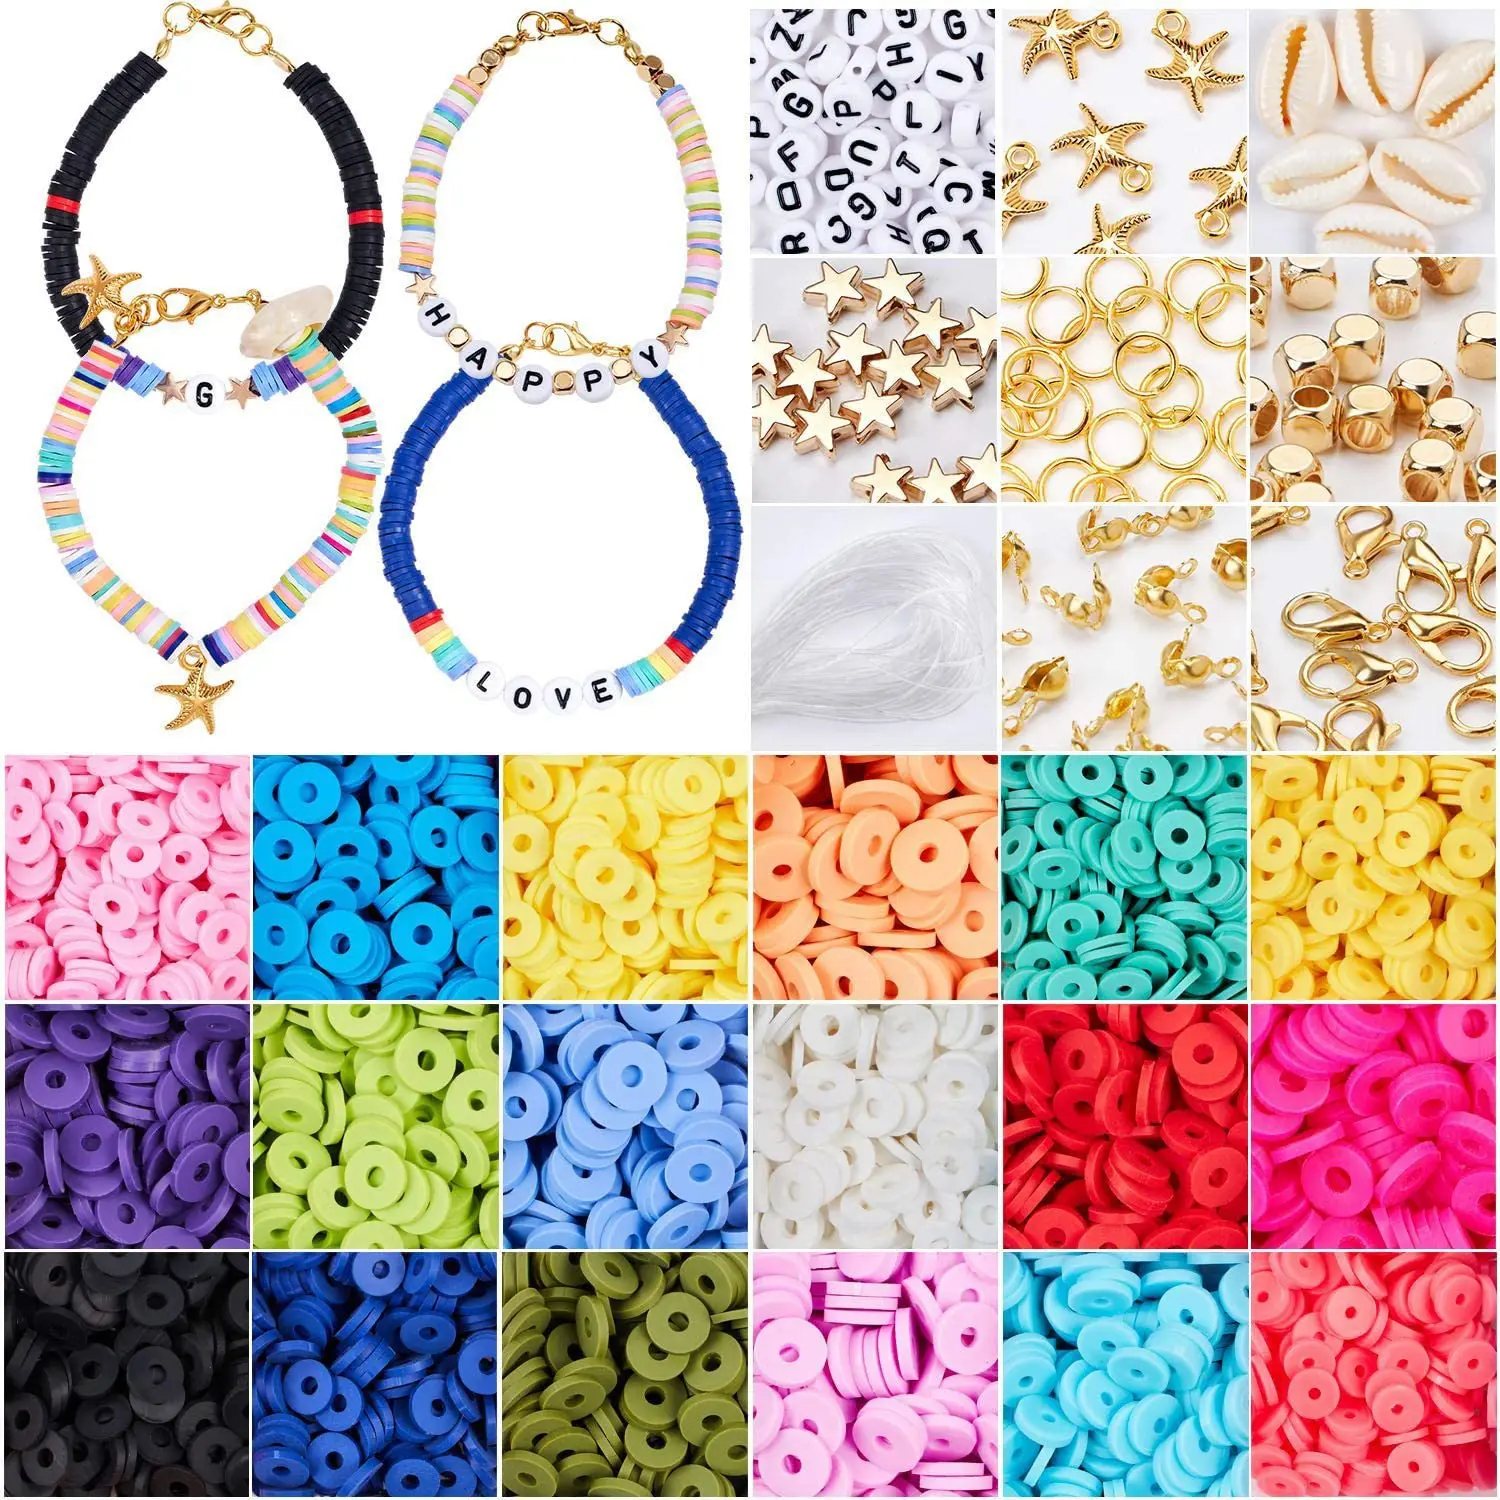 

4800 Pcs Flat Round Polymer Clay Spacer Beads for Jewelry Making Bracelets Necklace Earring DIY Craft Kit (6mm 18 Colors Beads), As the picture shows